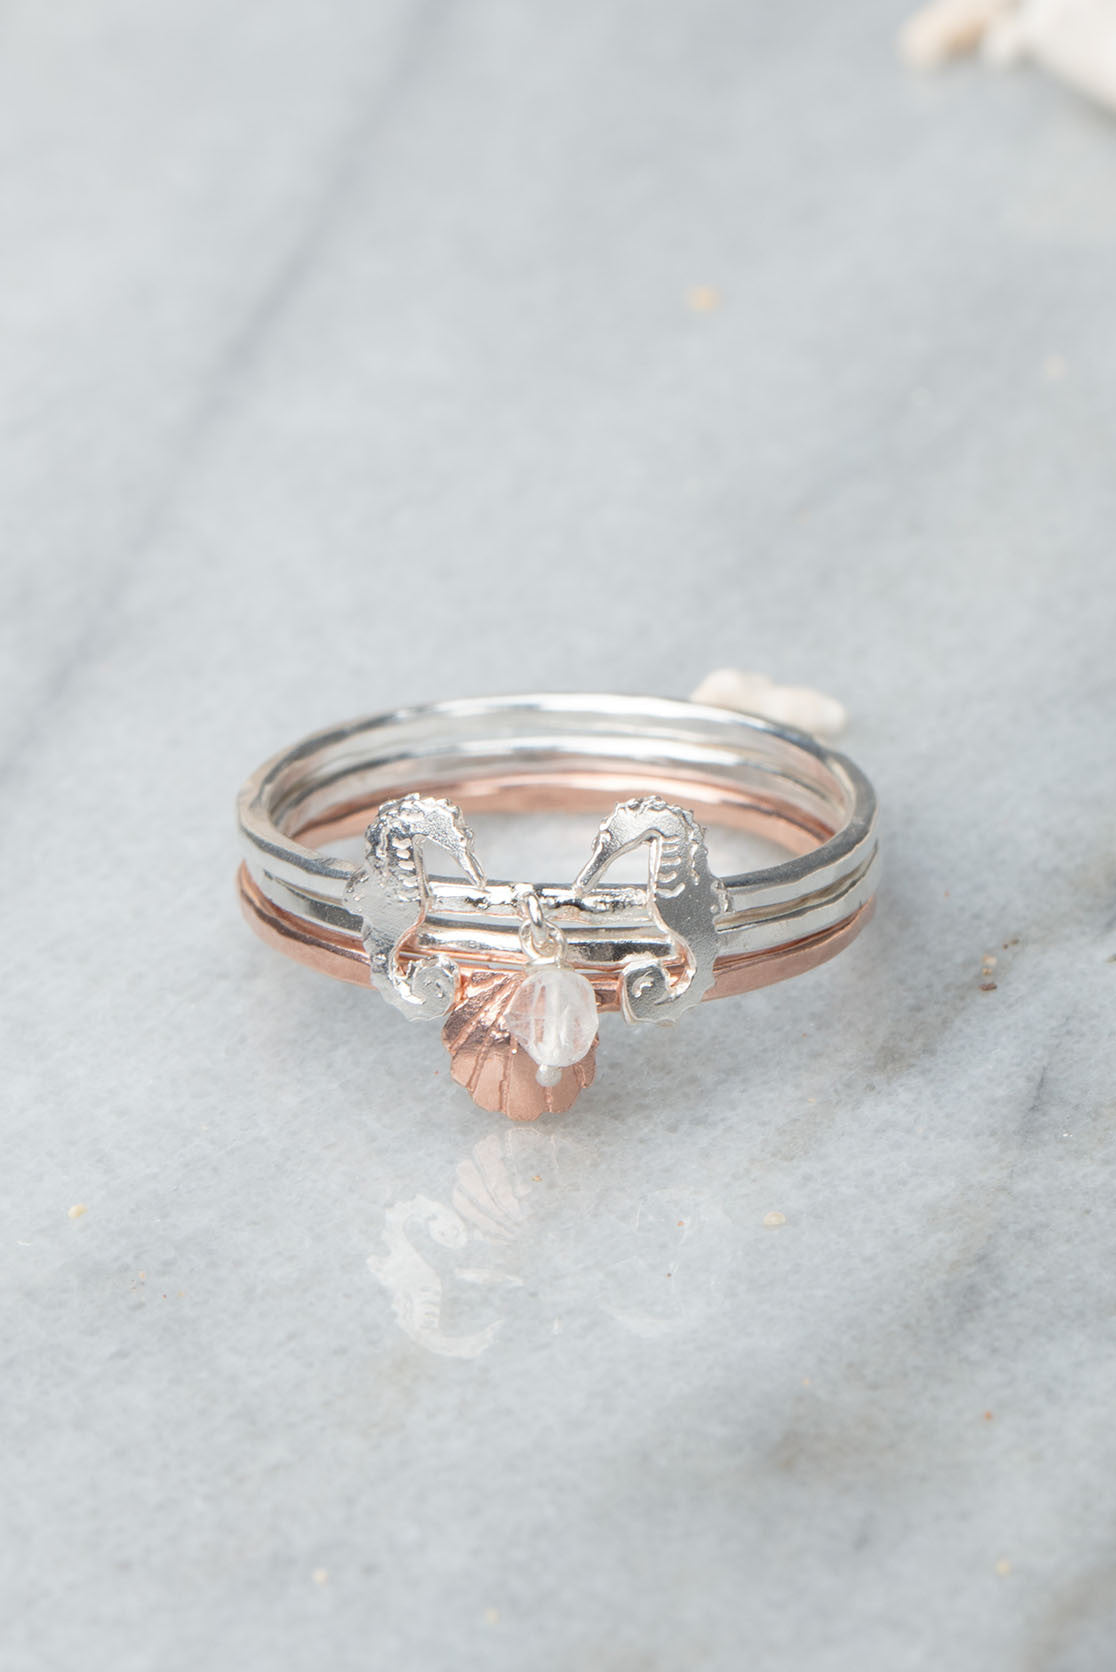 Sea creatures jewelery double ring set with silver and rose gold seahorses